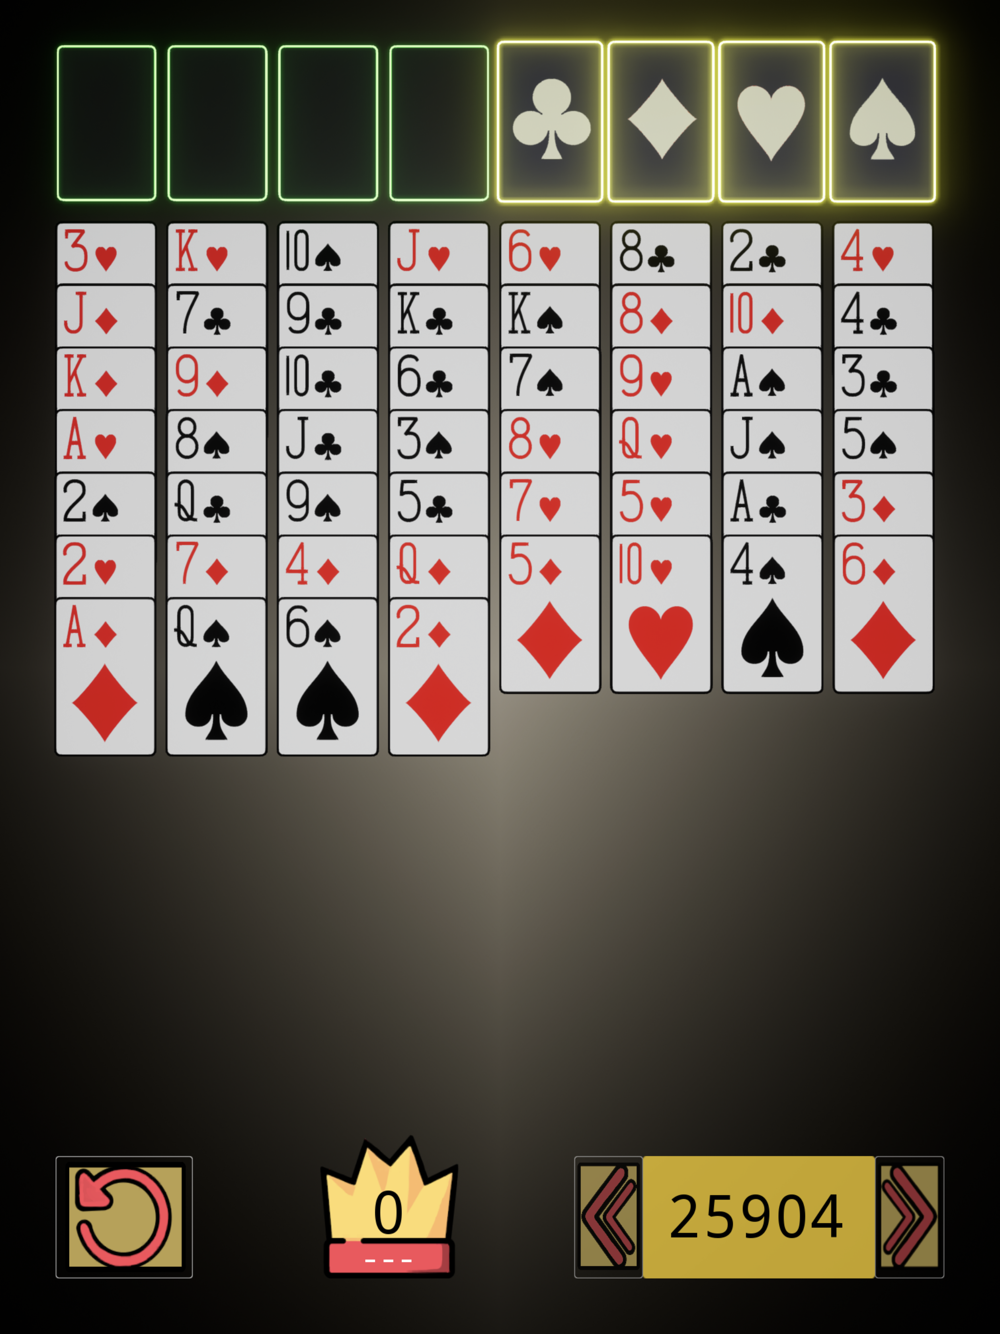 ⋆FreeCell on the App Store